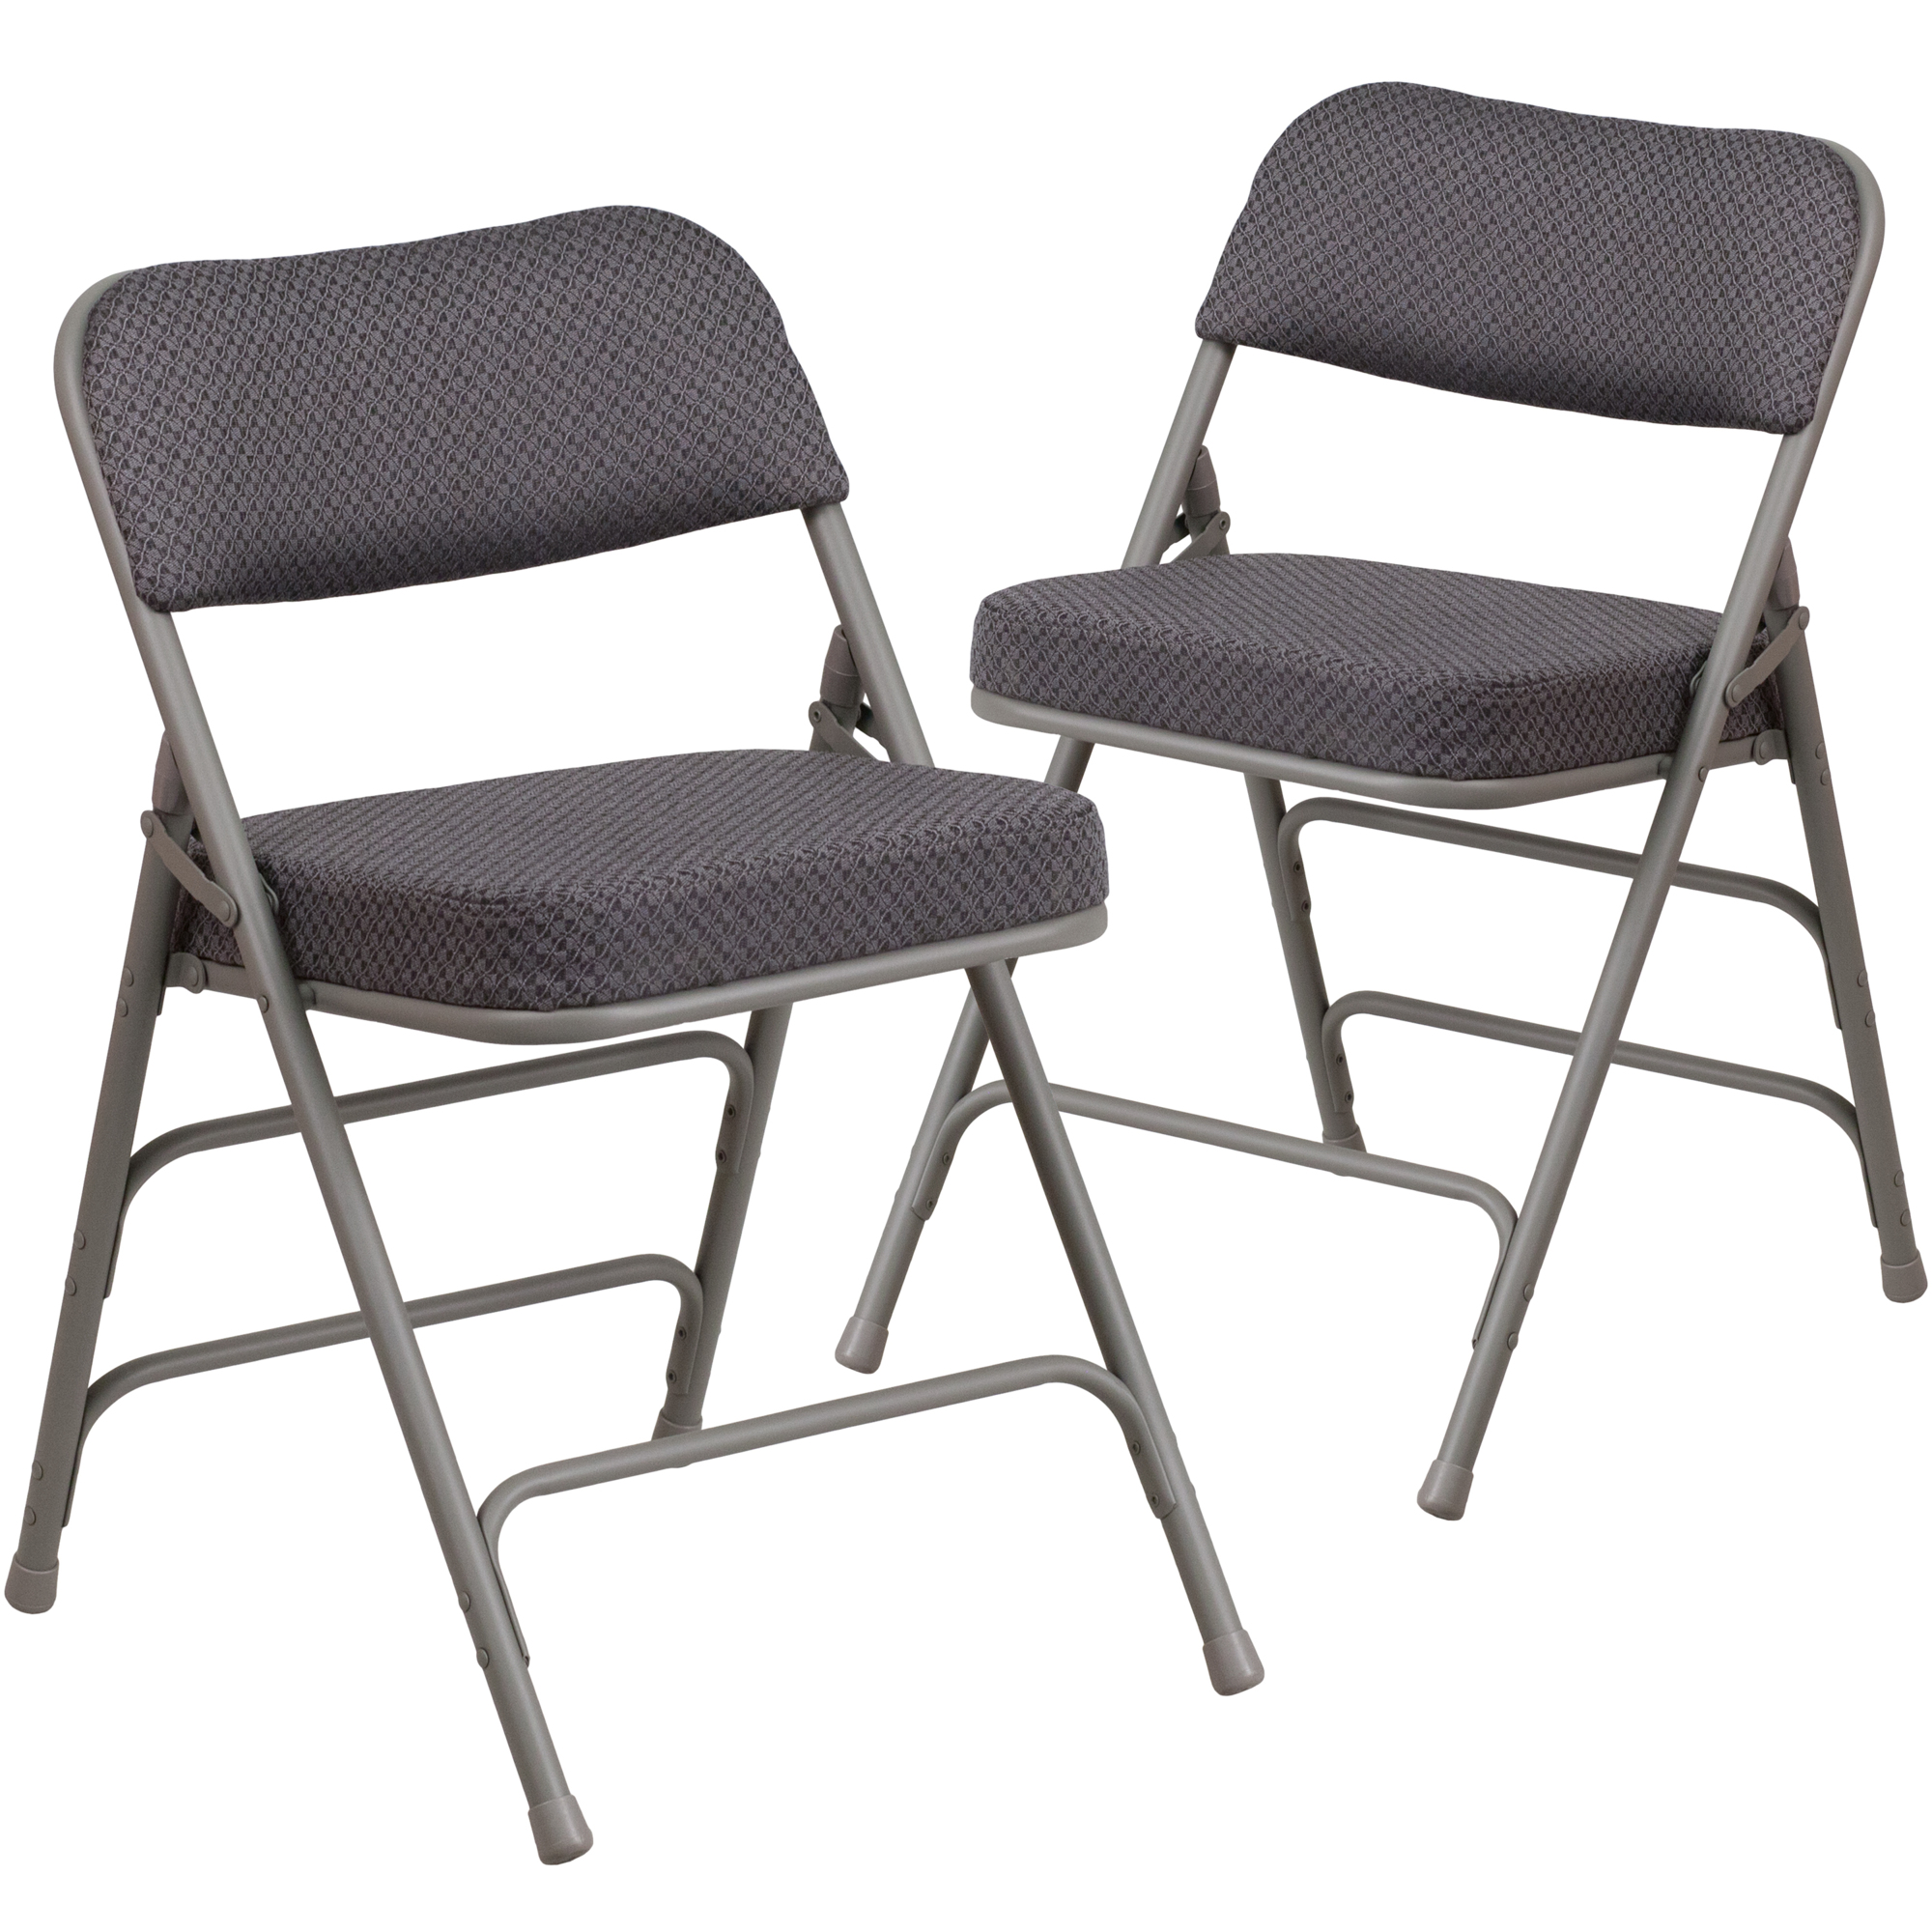 Flash Furniture, 2 Pack 18Inch W Curved Gray Fabric Metal Folding Chair, Primary Color Gray, Included (qty.) 2, Model 2AWMC320AFGRY